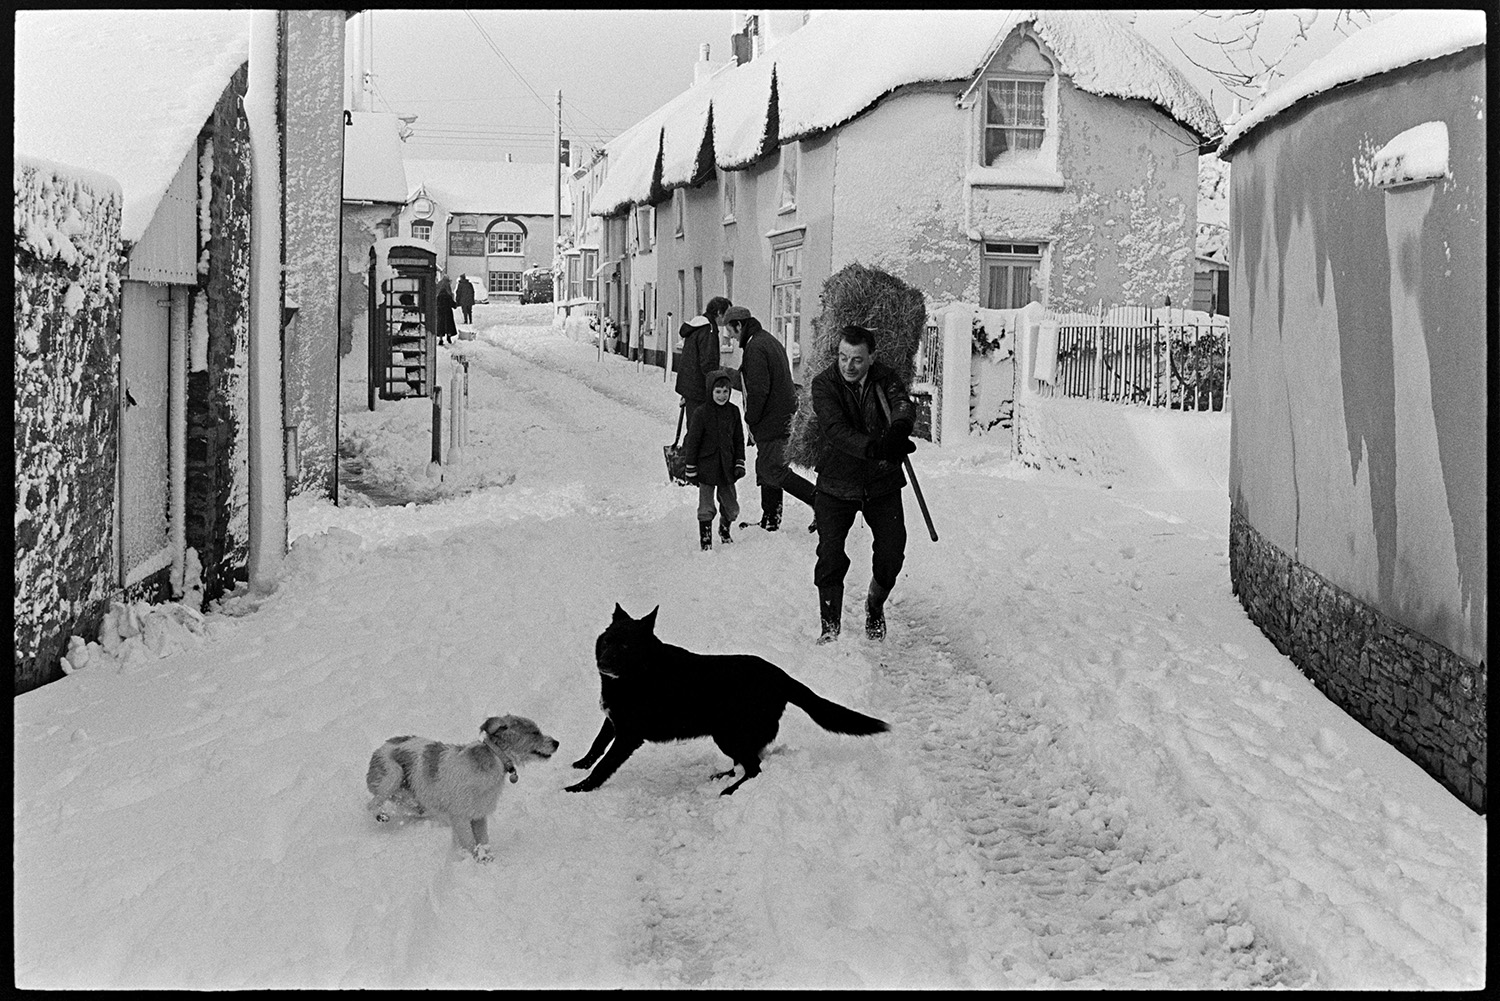 Snow, man taking hay through village to fields, woman with dog. 
[Cyril Nott carrying a hay bale on his back using a pitch fork, through the snow in Fore Street, Dolton. Other people are in the street in the snow and a person can be seen in the telephone box in the background, opposite thatched cottages. Two dogs are playing in the foreground.]